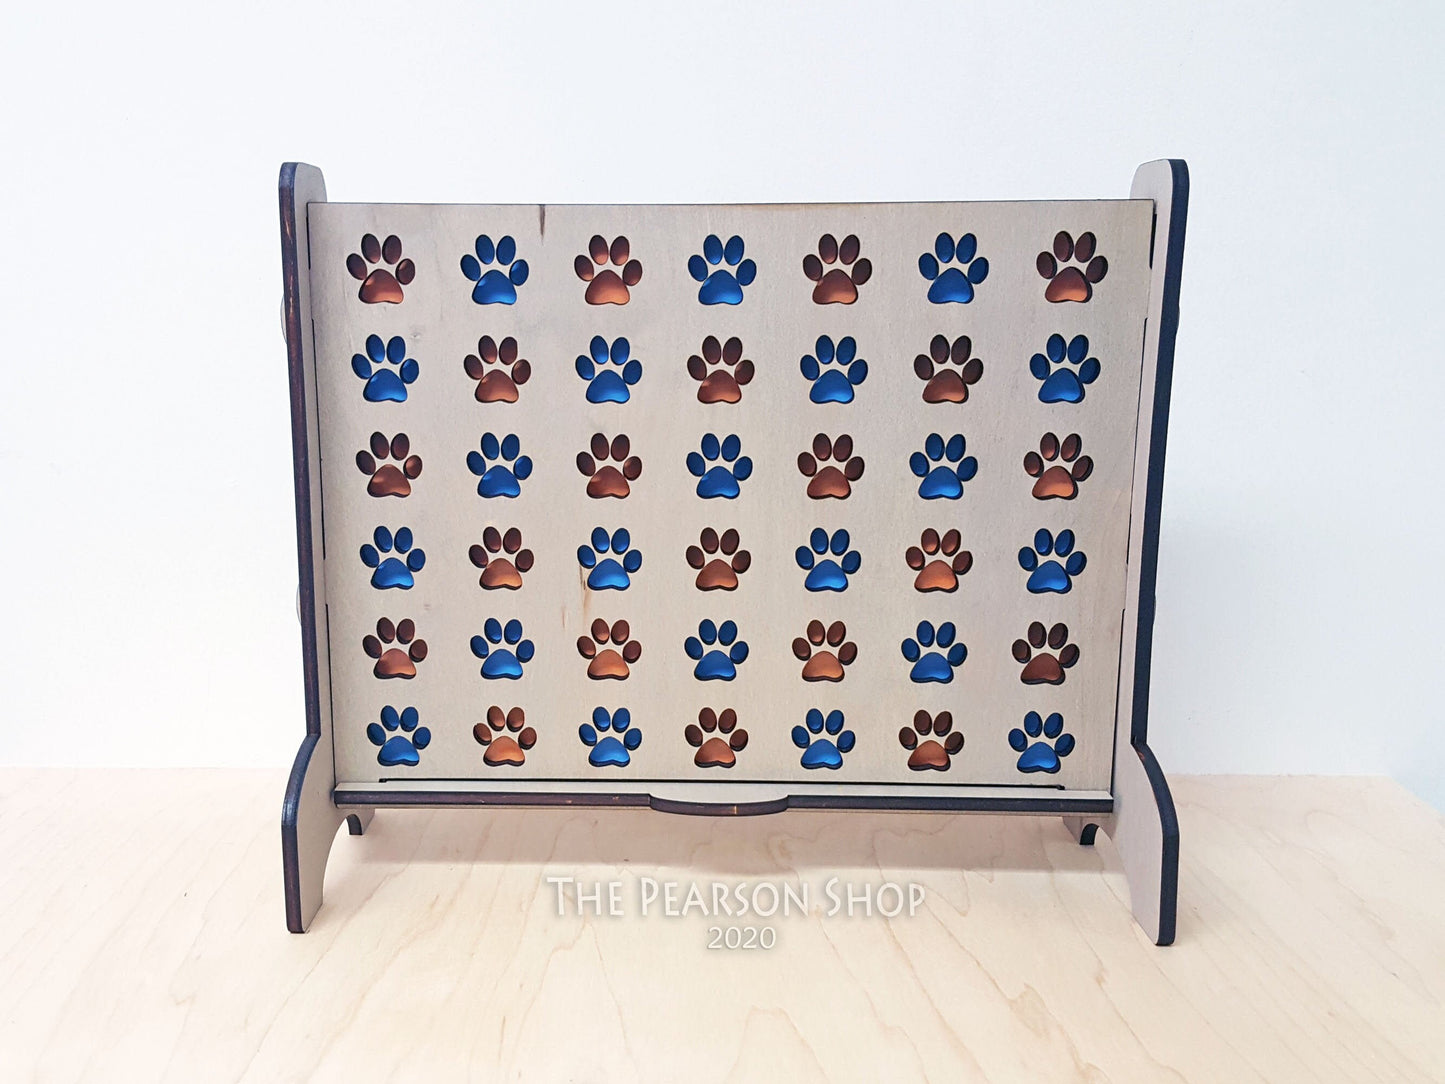 Connect 4 Paw Prints Game